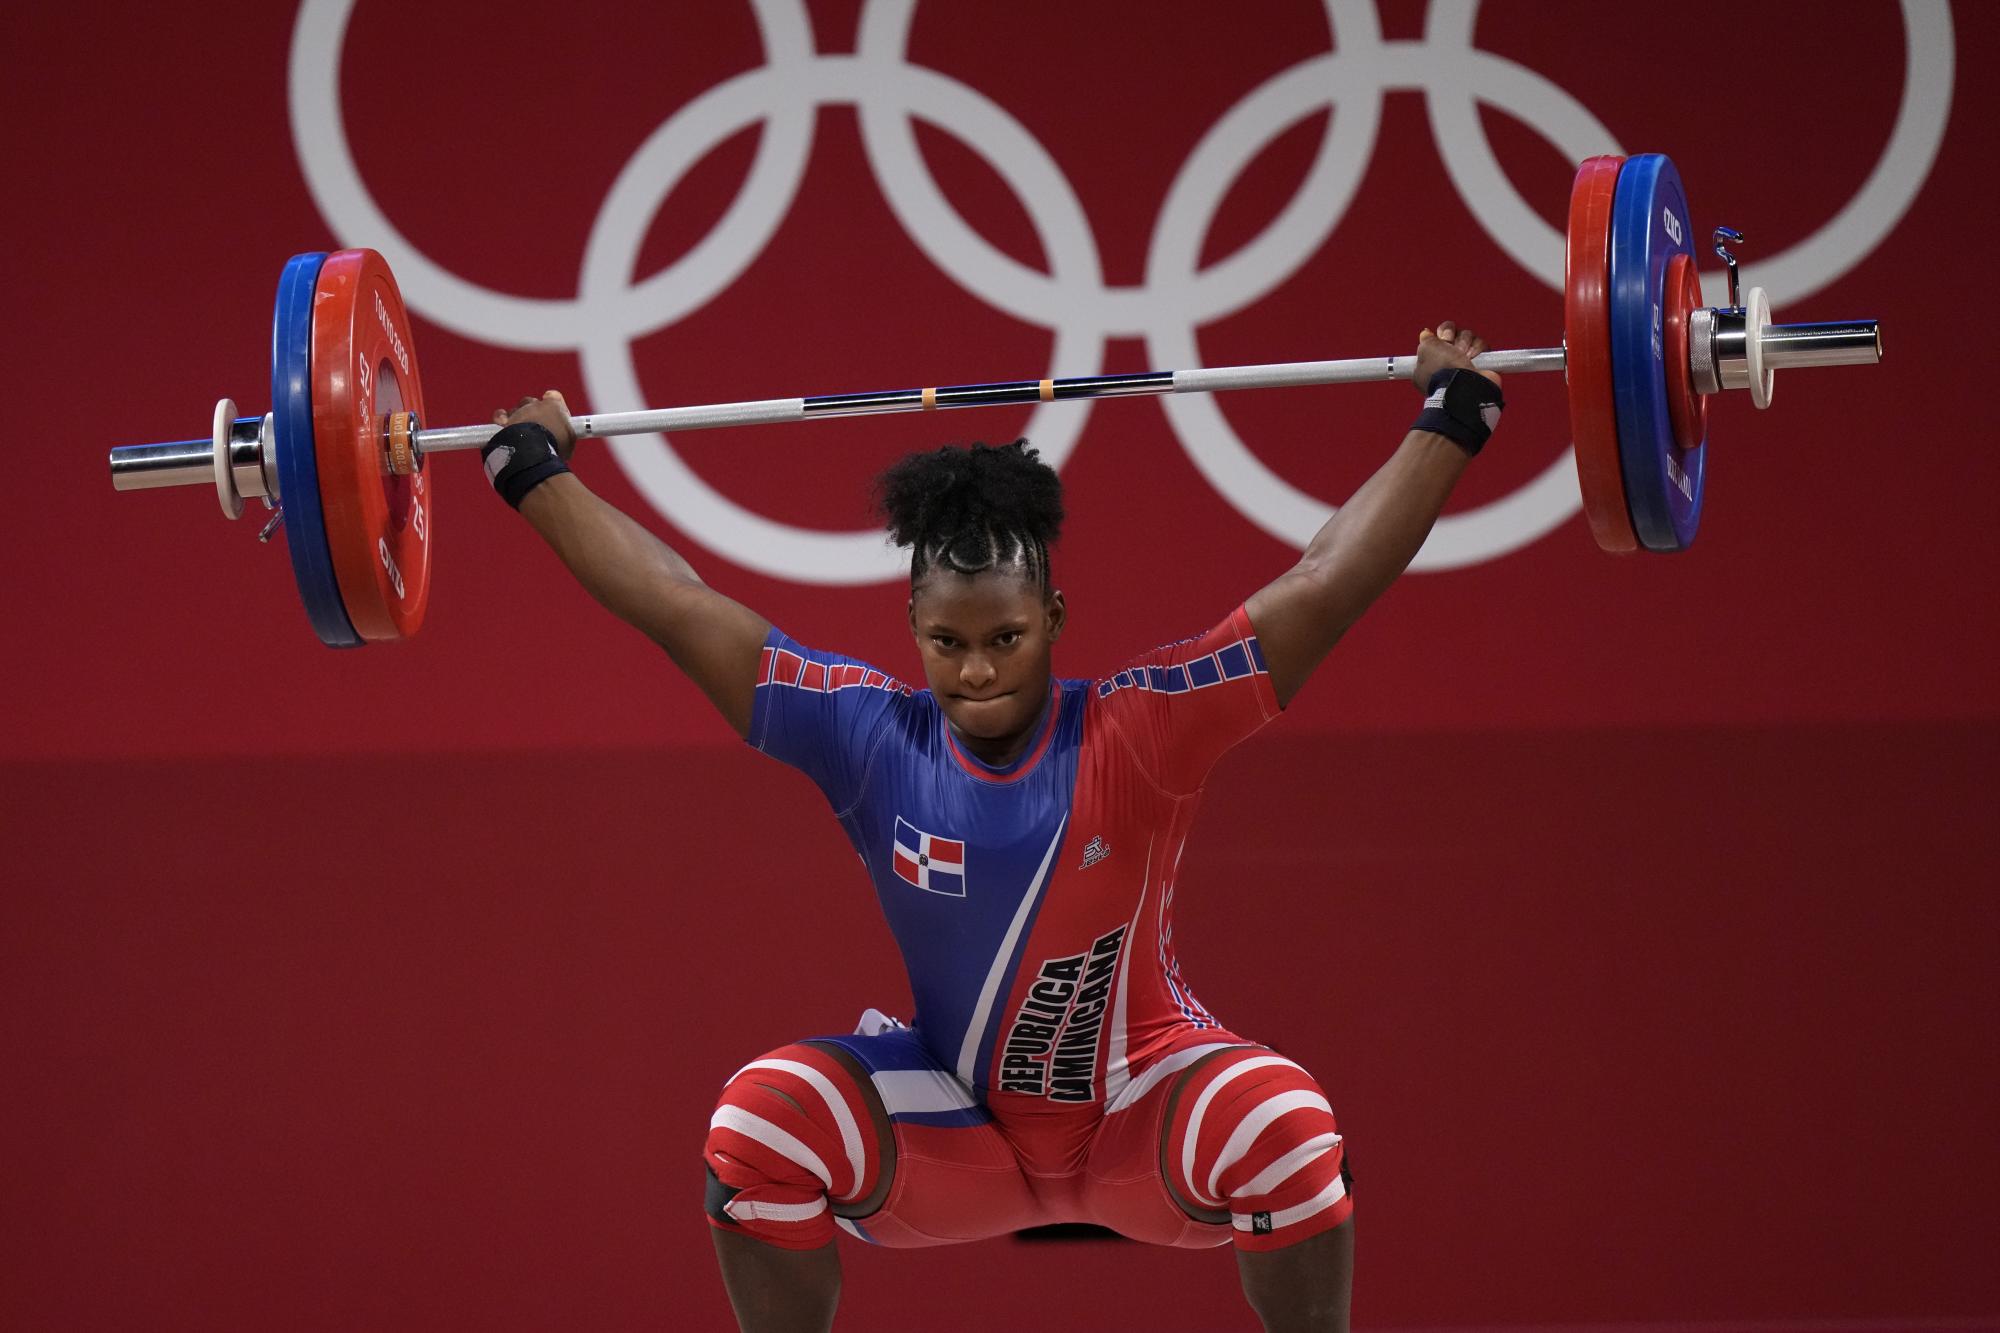 Crismery Dominga Santana Peguero of Dominican Republic competes in the womens 87kg weightlifting event at the 2020 Summer Olympics, Monday, Aug. 2, 2021, in Tokyo, Japan. (AP Photo/Luca Bruno)